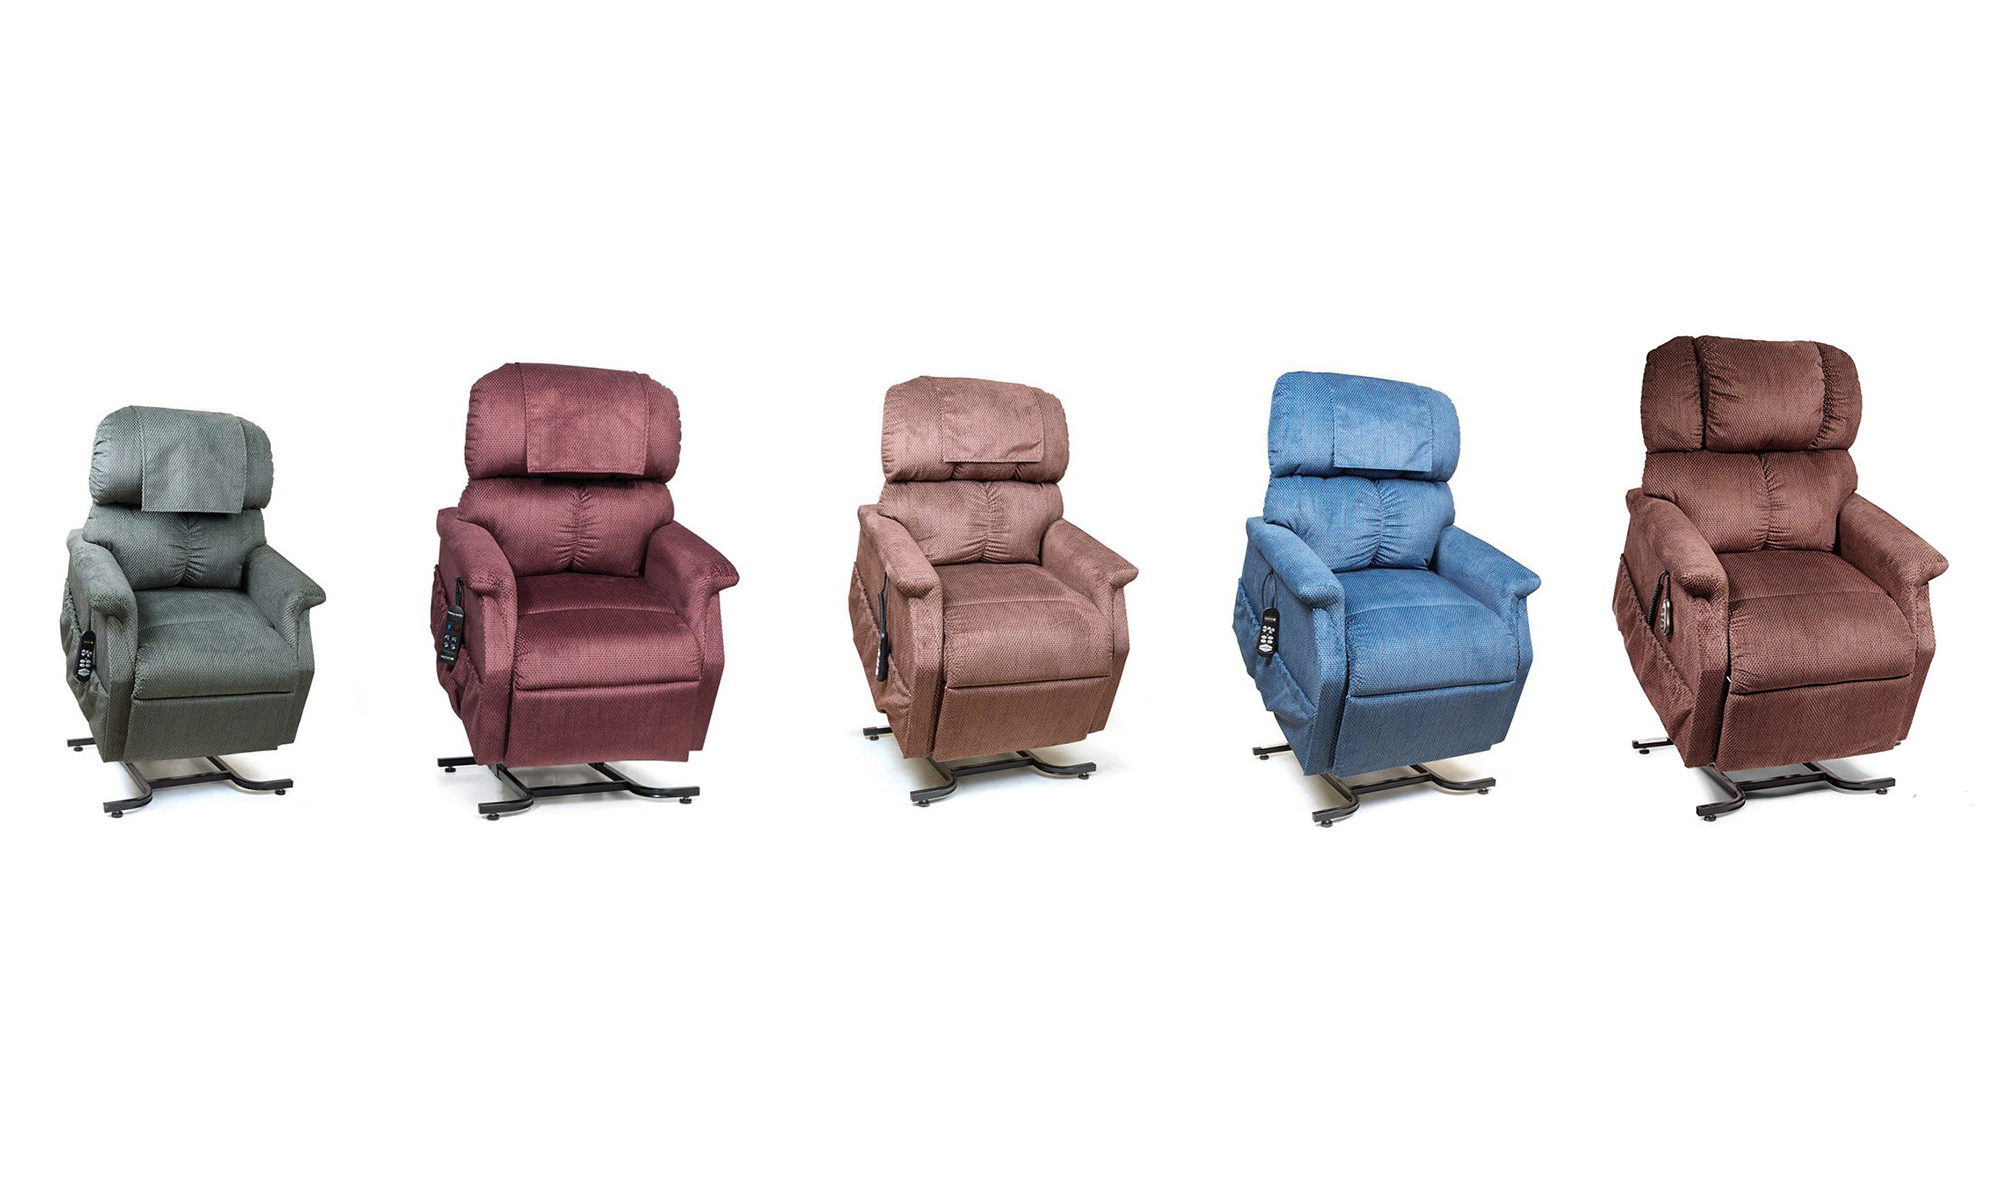 Lift-chair 5 colors